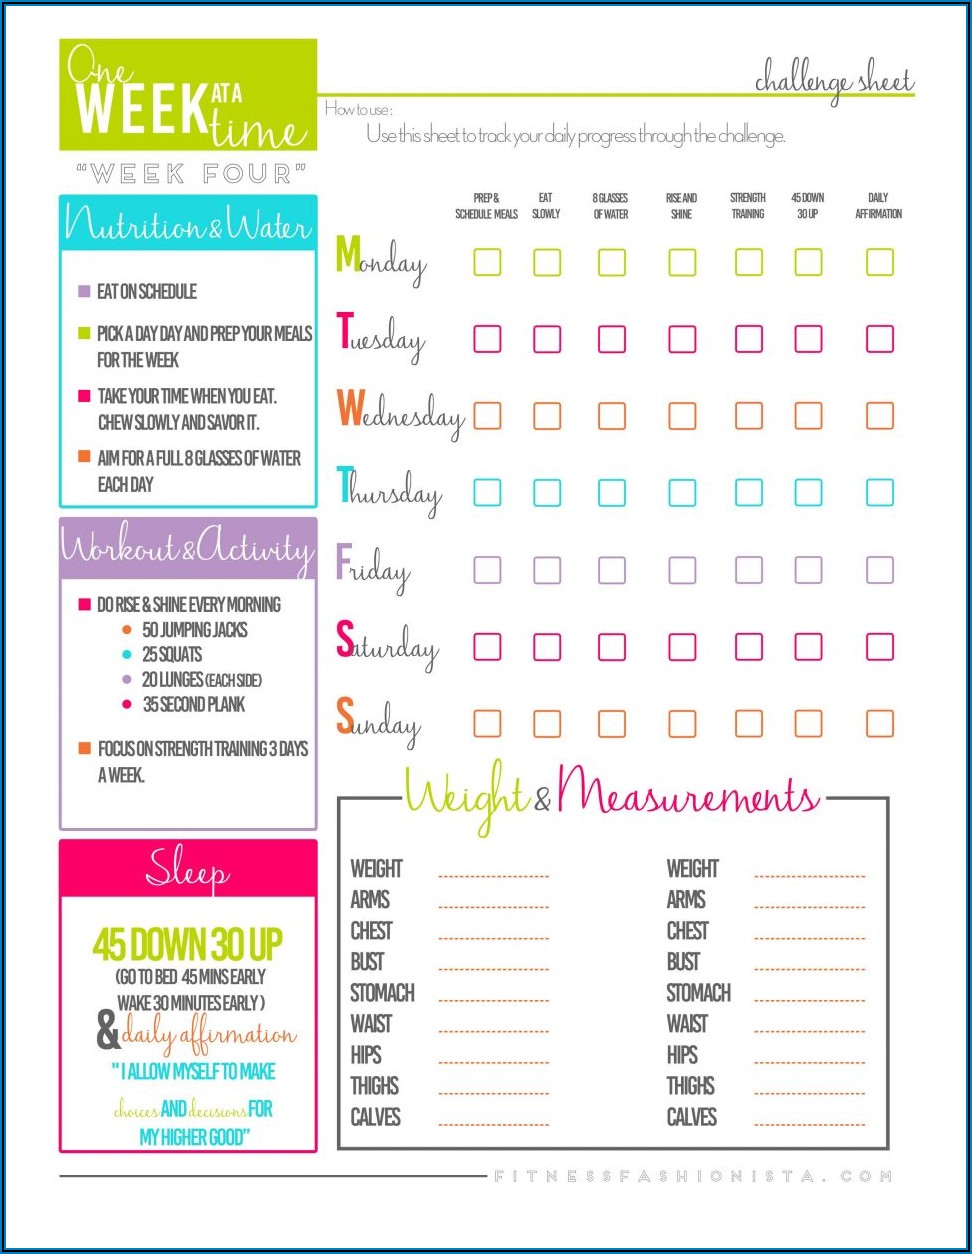 Goal Setting And Tracking Template